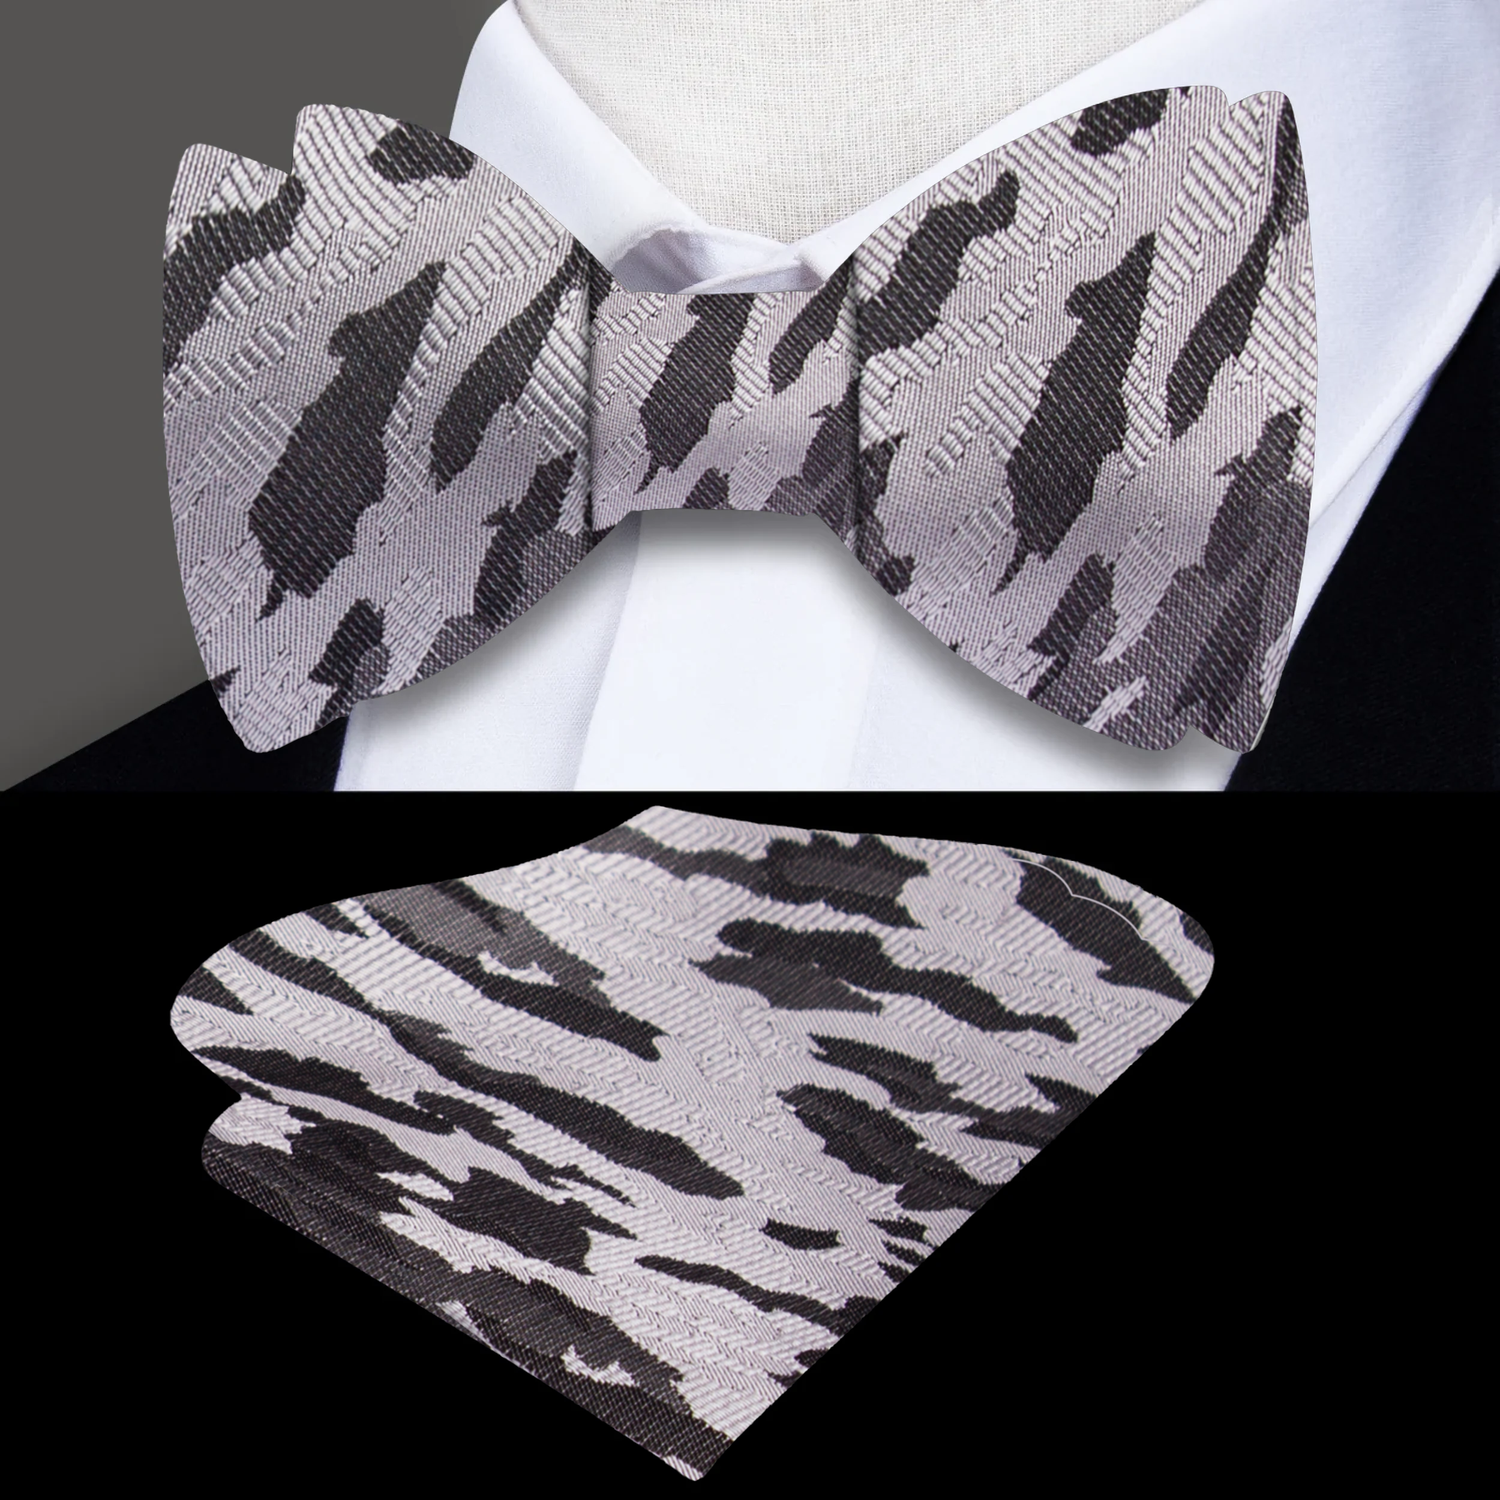 Shades of Grey and Black Camouflage Bow Tie and Matching Square